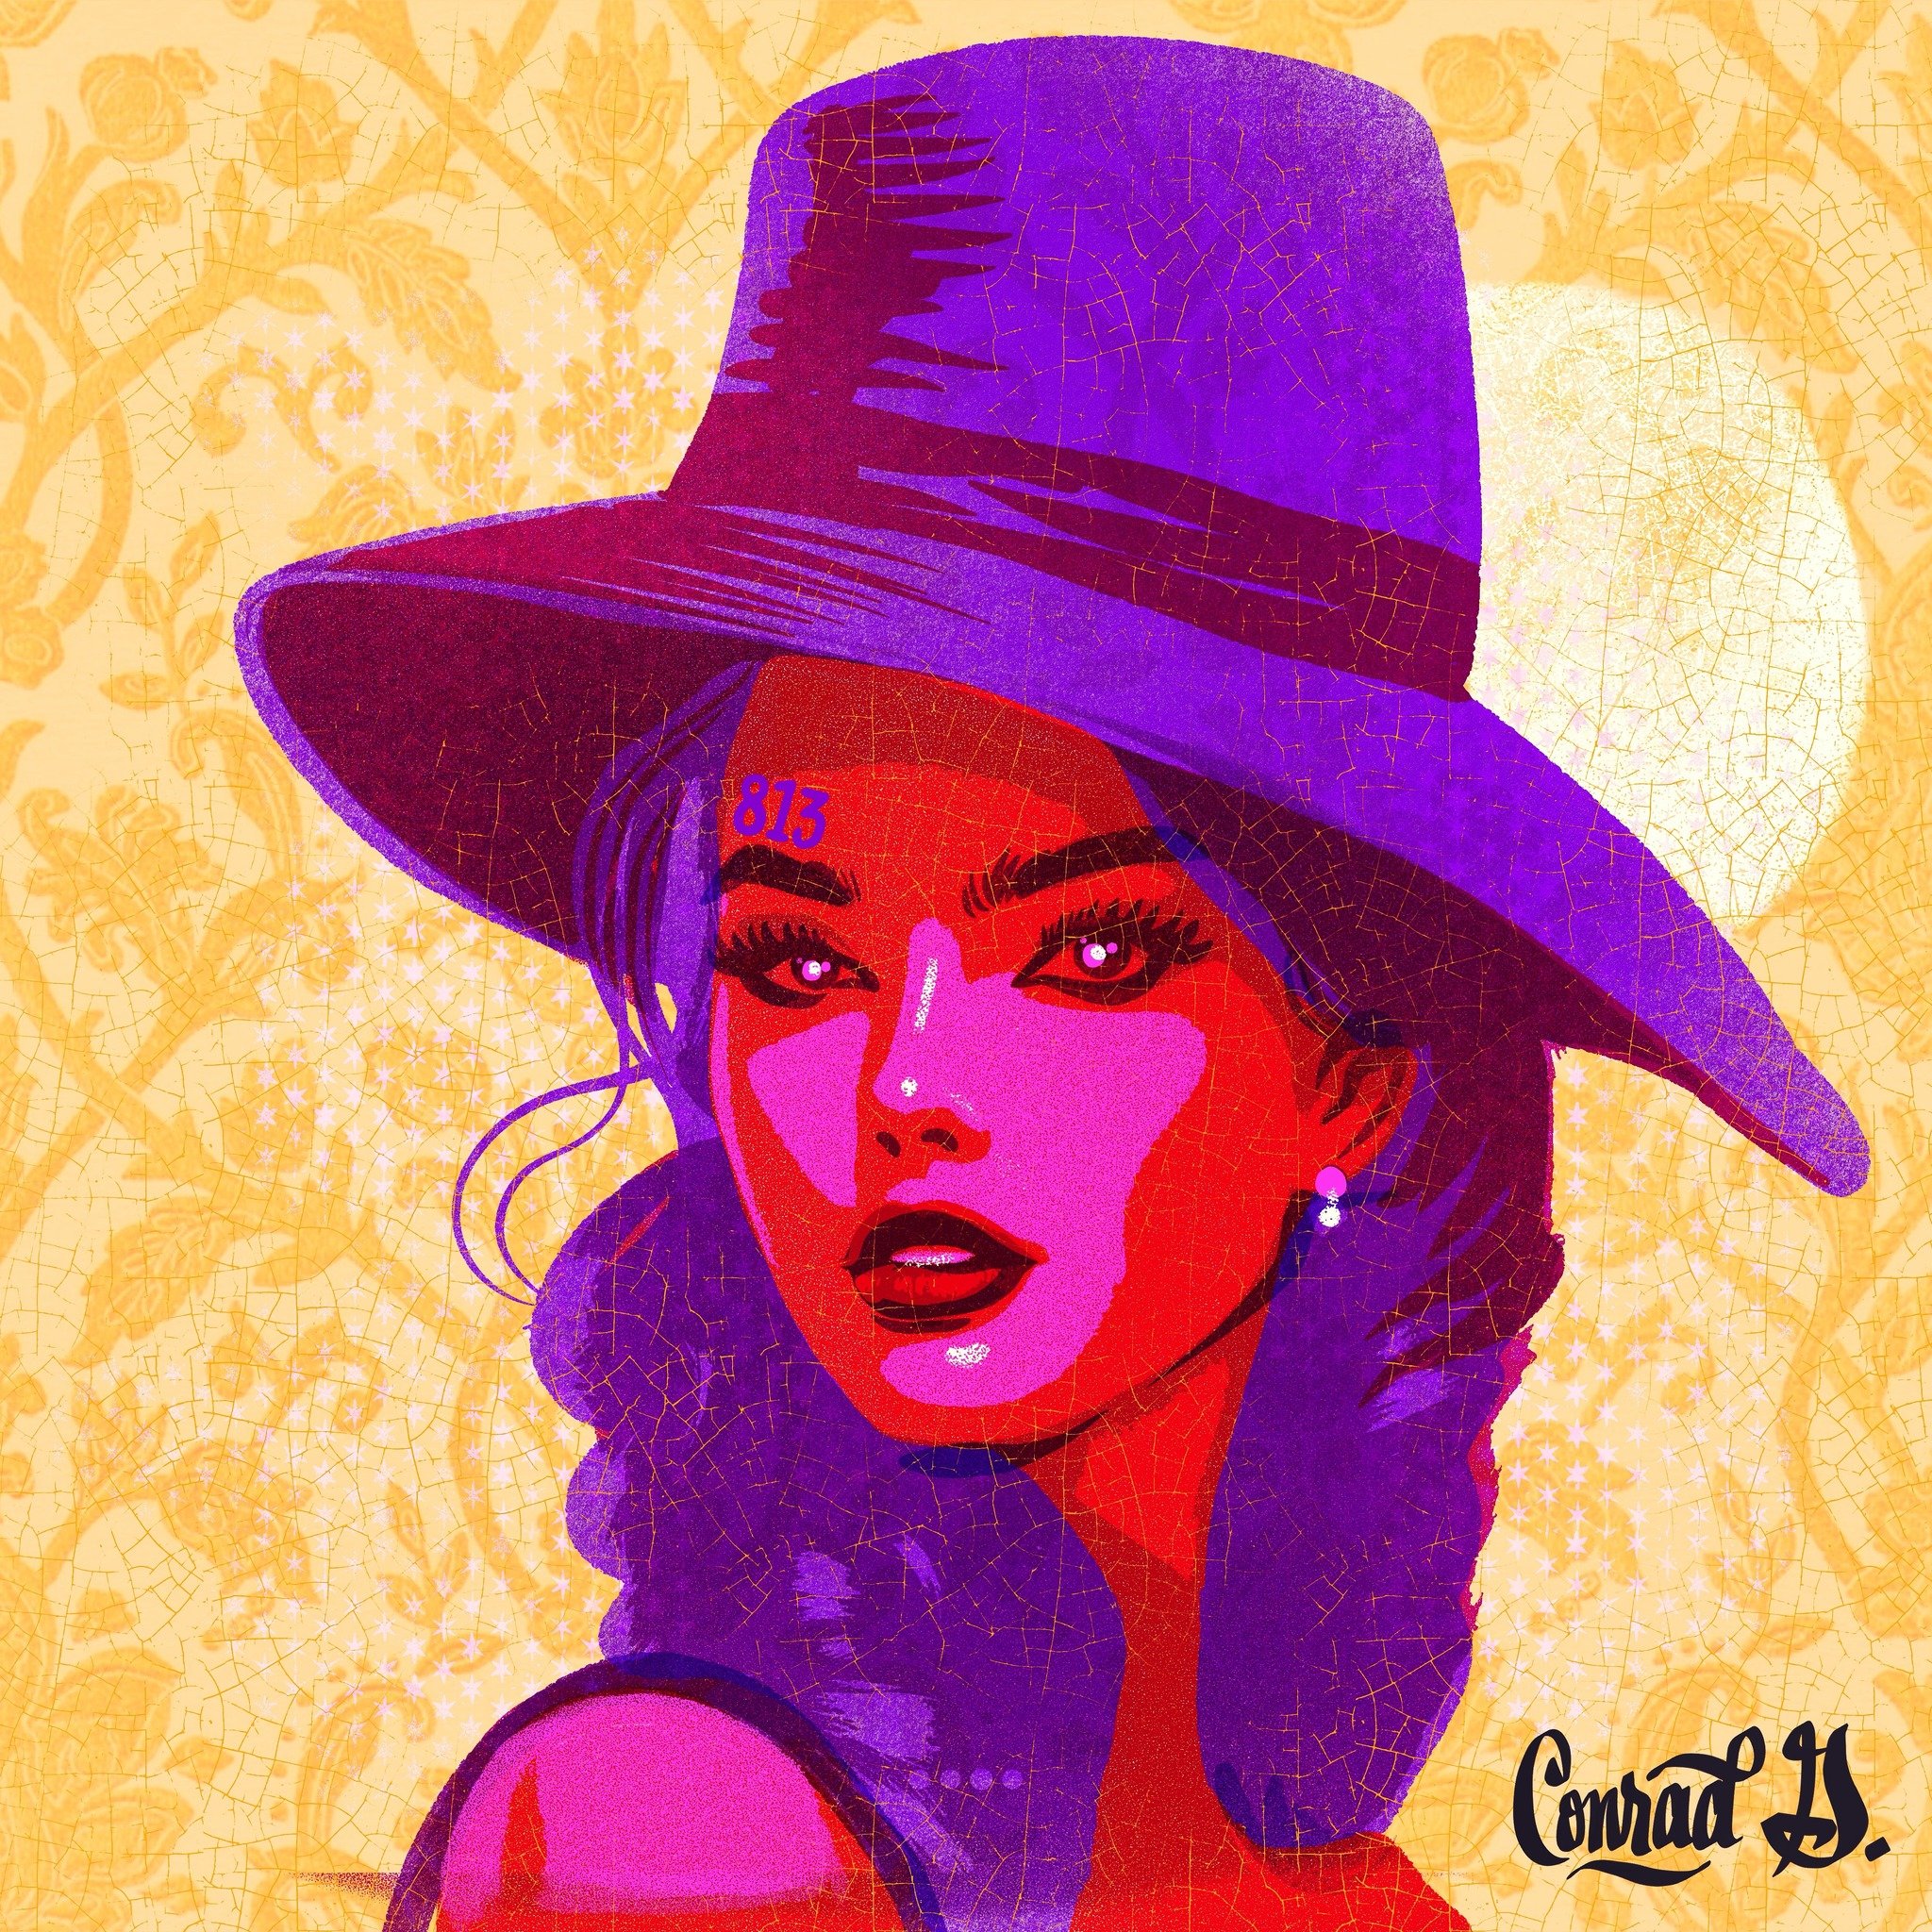 🌴✨ Introducing the epitome of vintage Florida vibes: my latest illustration of a retro Florida babe! 🌺🎨 Created with custom brushes and textures, every stroke captures the essence of sun-kissed beaches and palm-lined streets. 🖌️💫 Dive into nosta